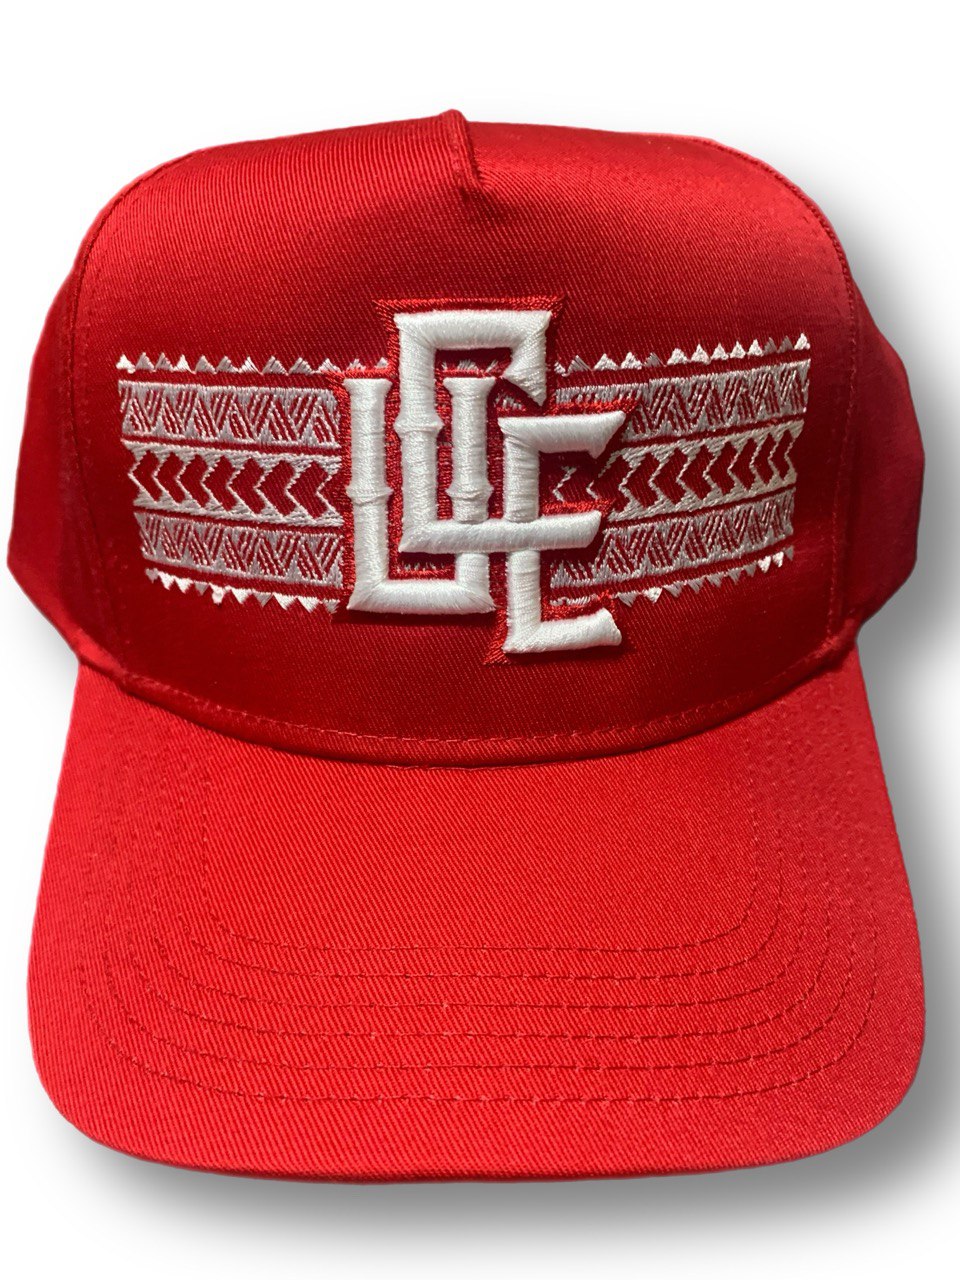 UCE CLASSIC CAP-RED/WHITE W/ TRIBAL